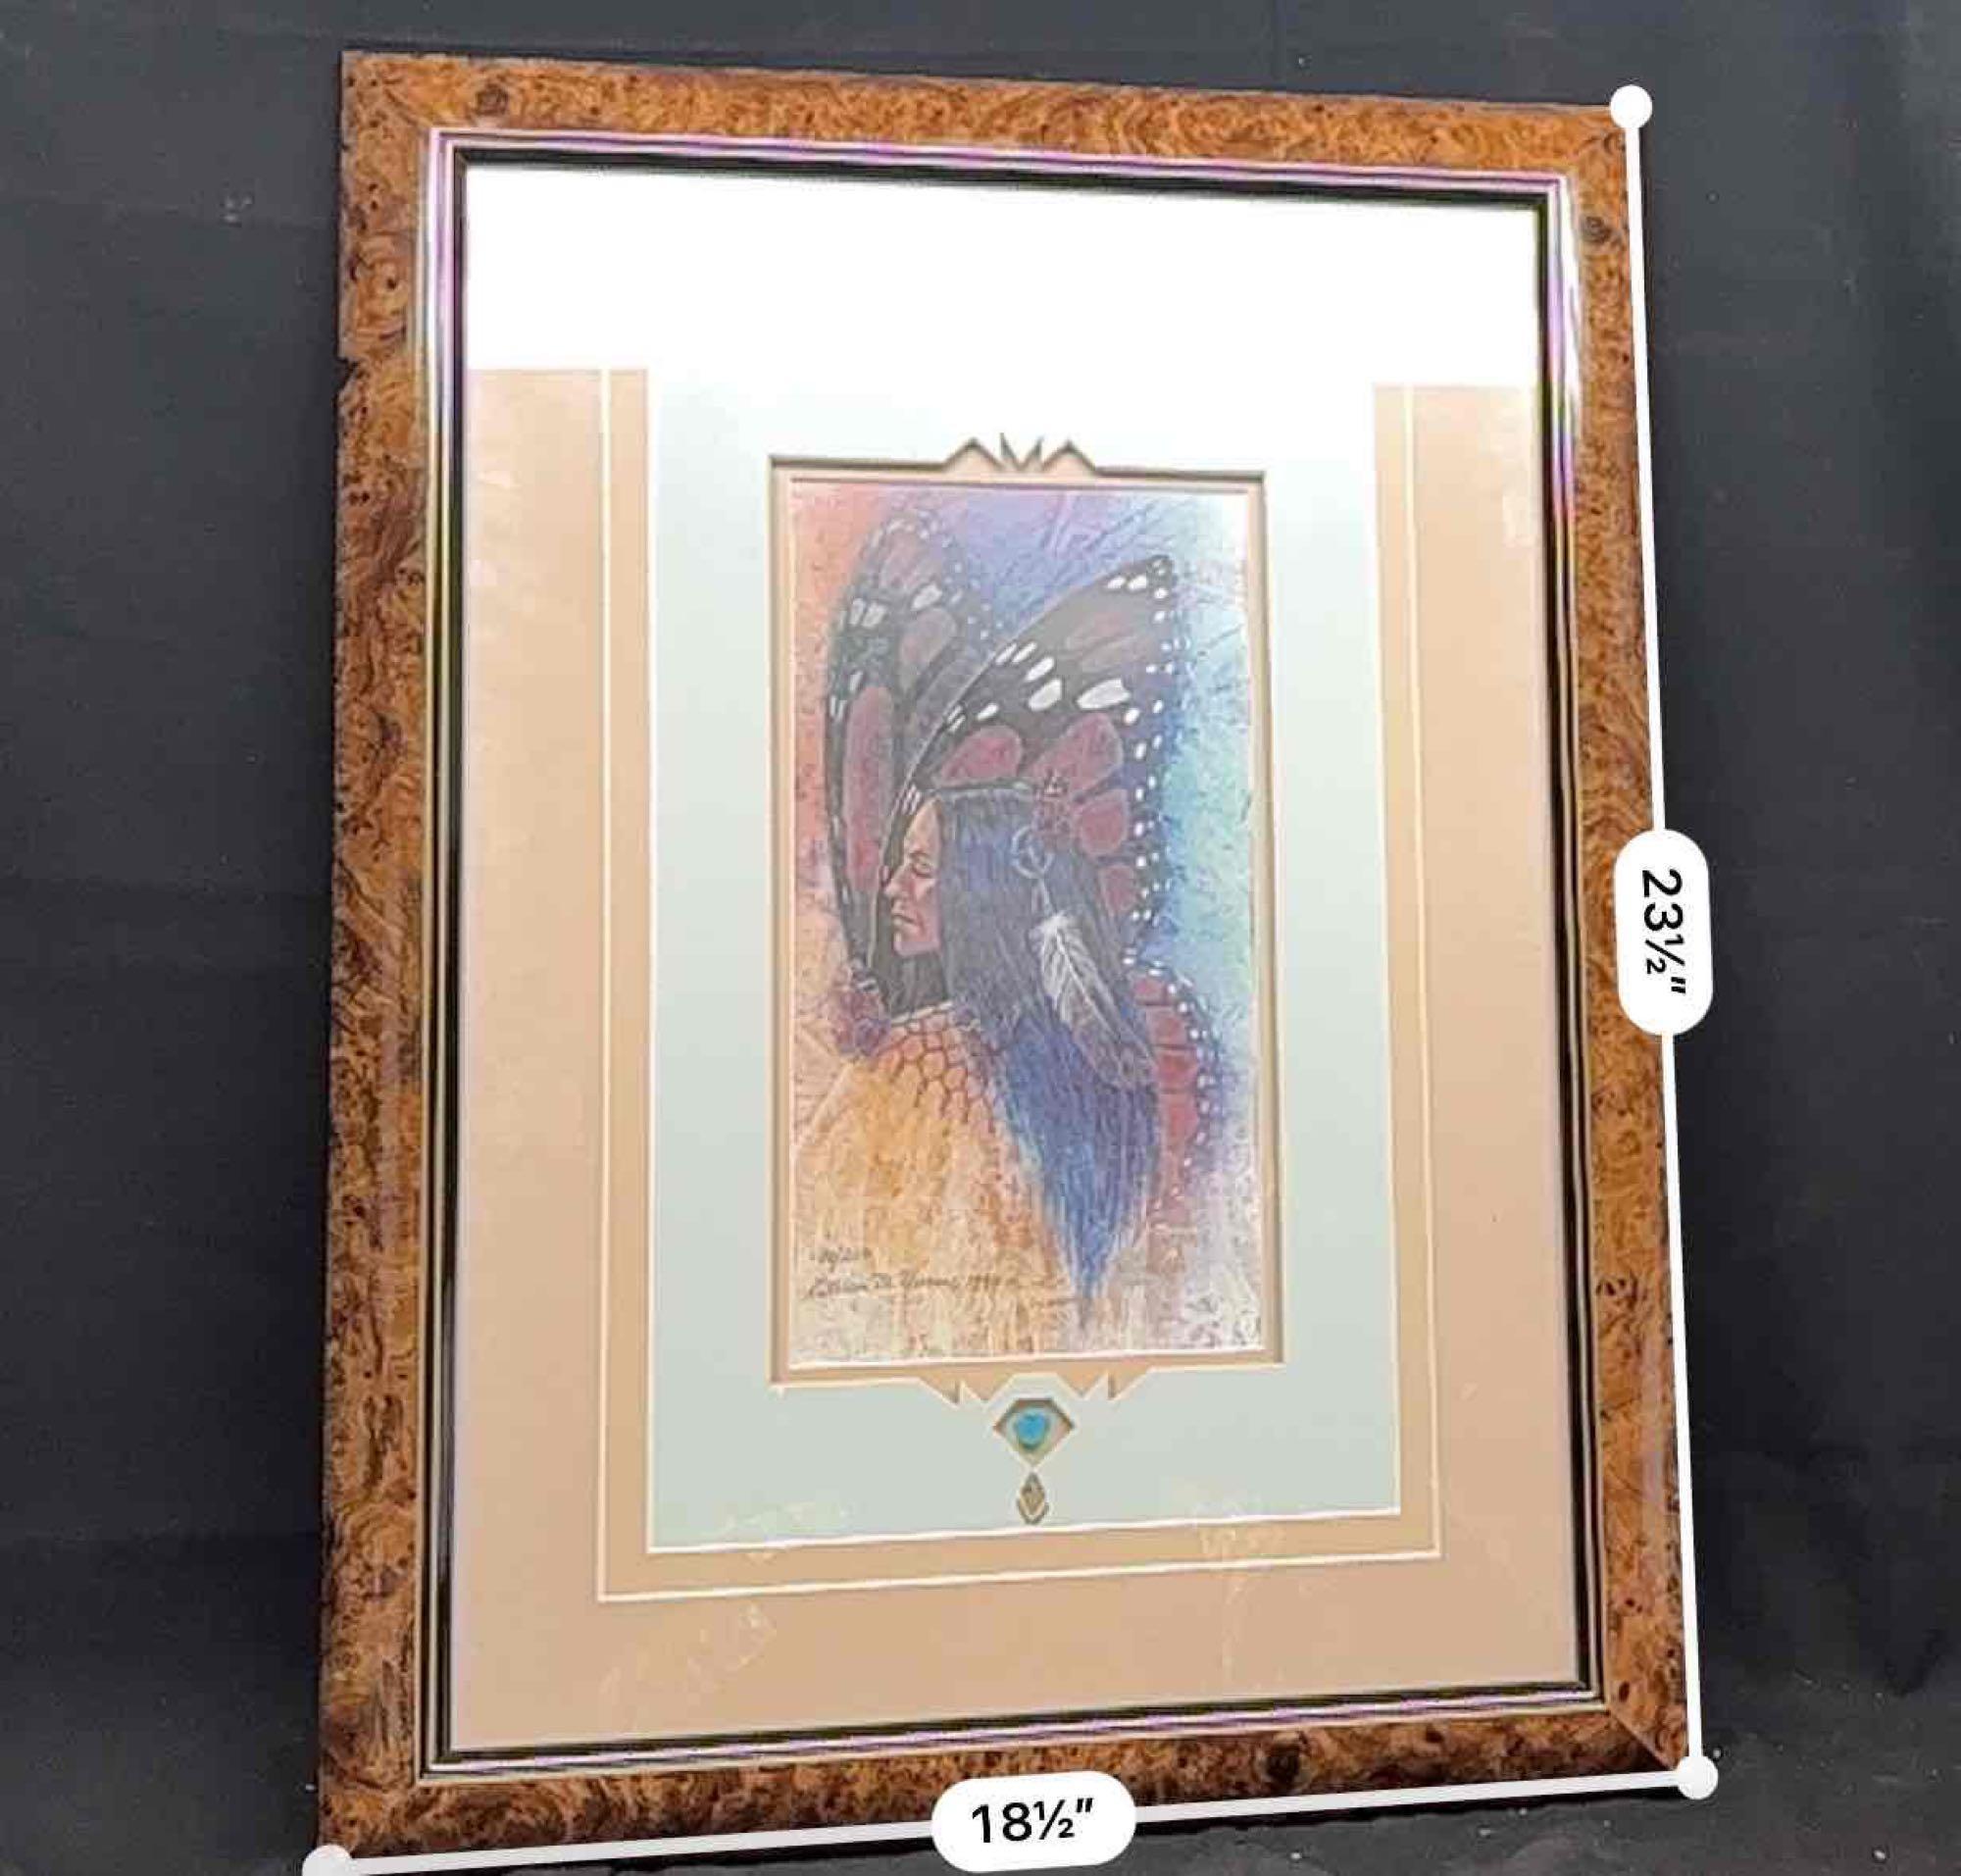 Framed Art A Northern Journey 9/250 Kathleen Morrow 1990 Lithograph w/ Turquoise